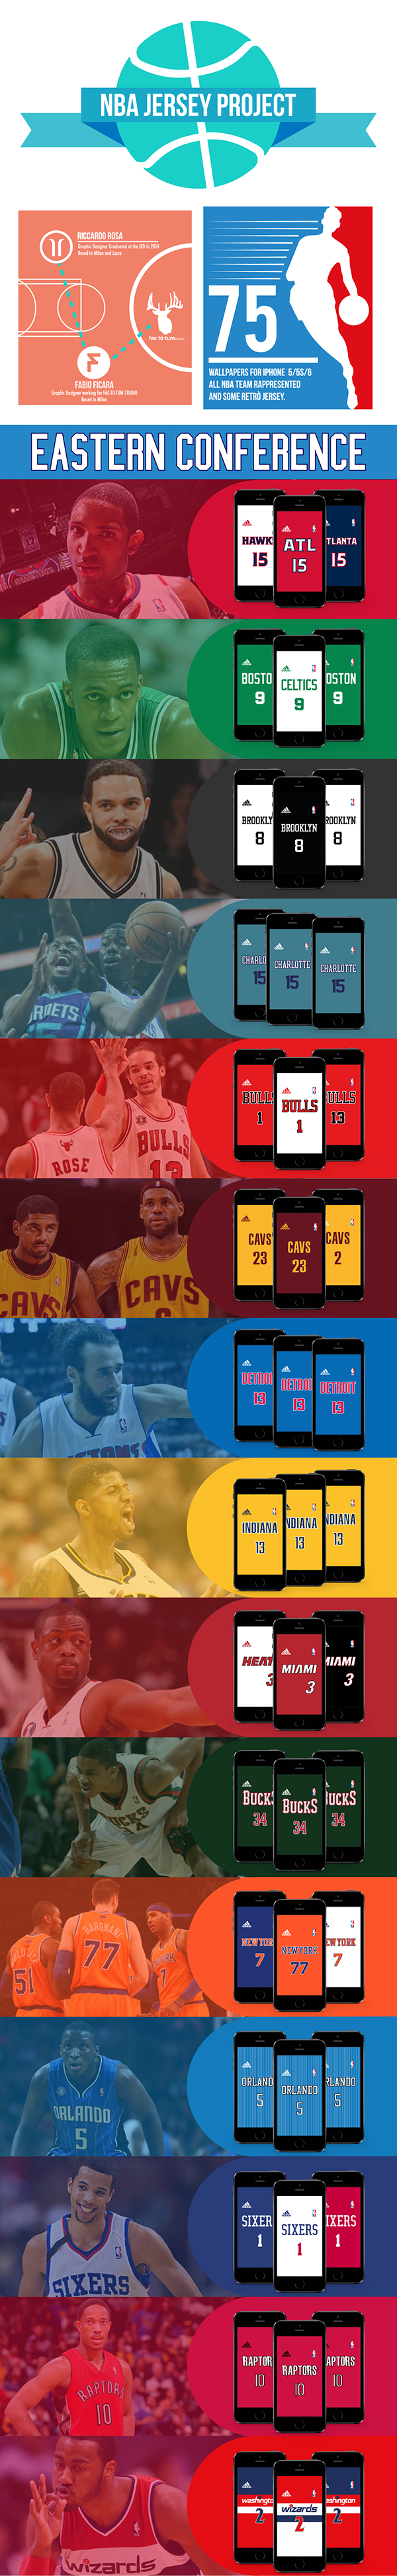 NBA JERSEY PROJECT - FREE IPHONE WALLPAPER on Behance